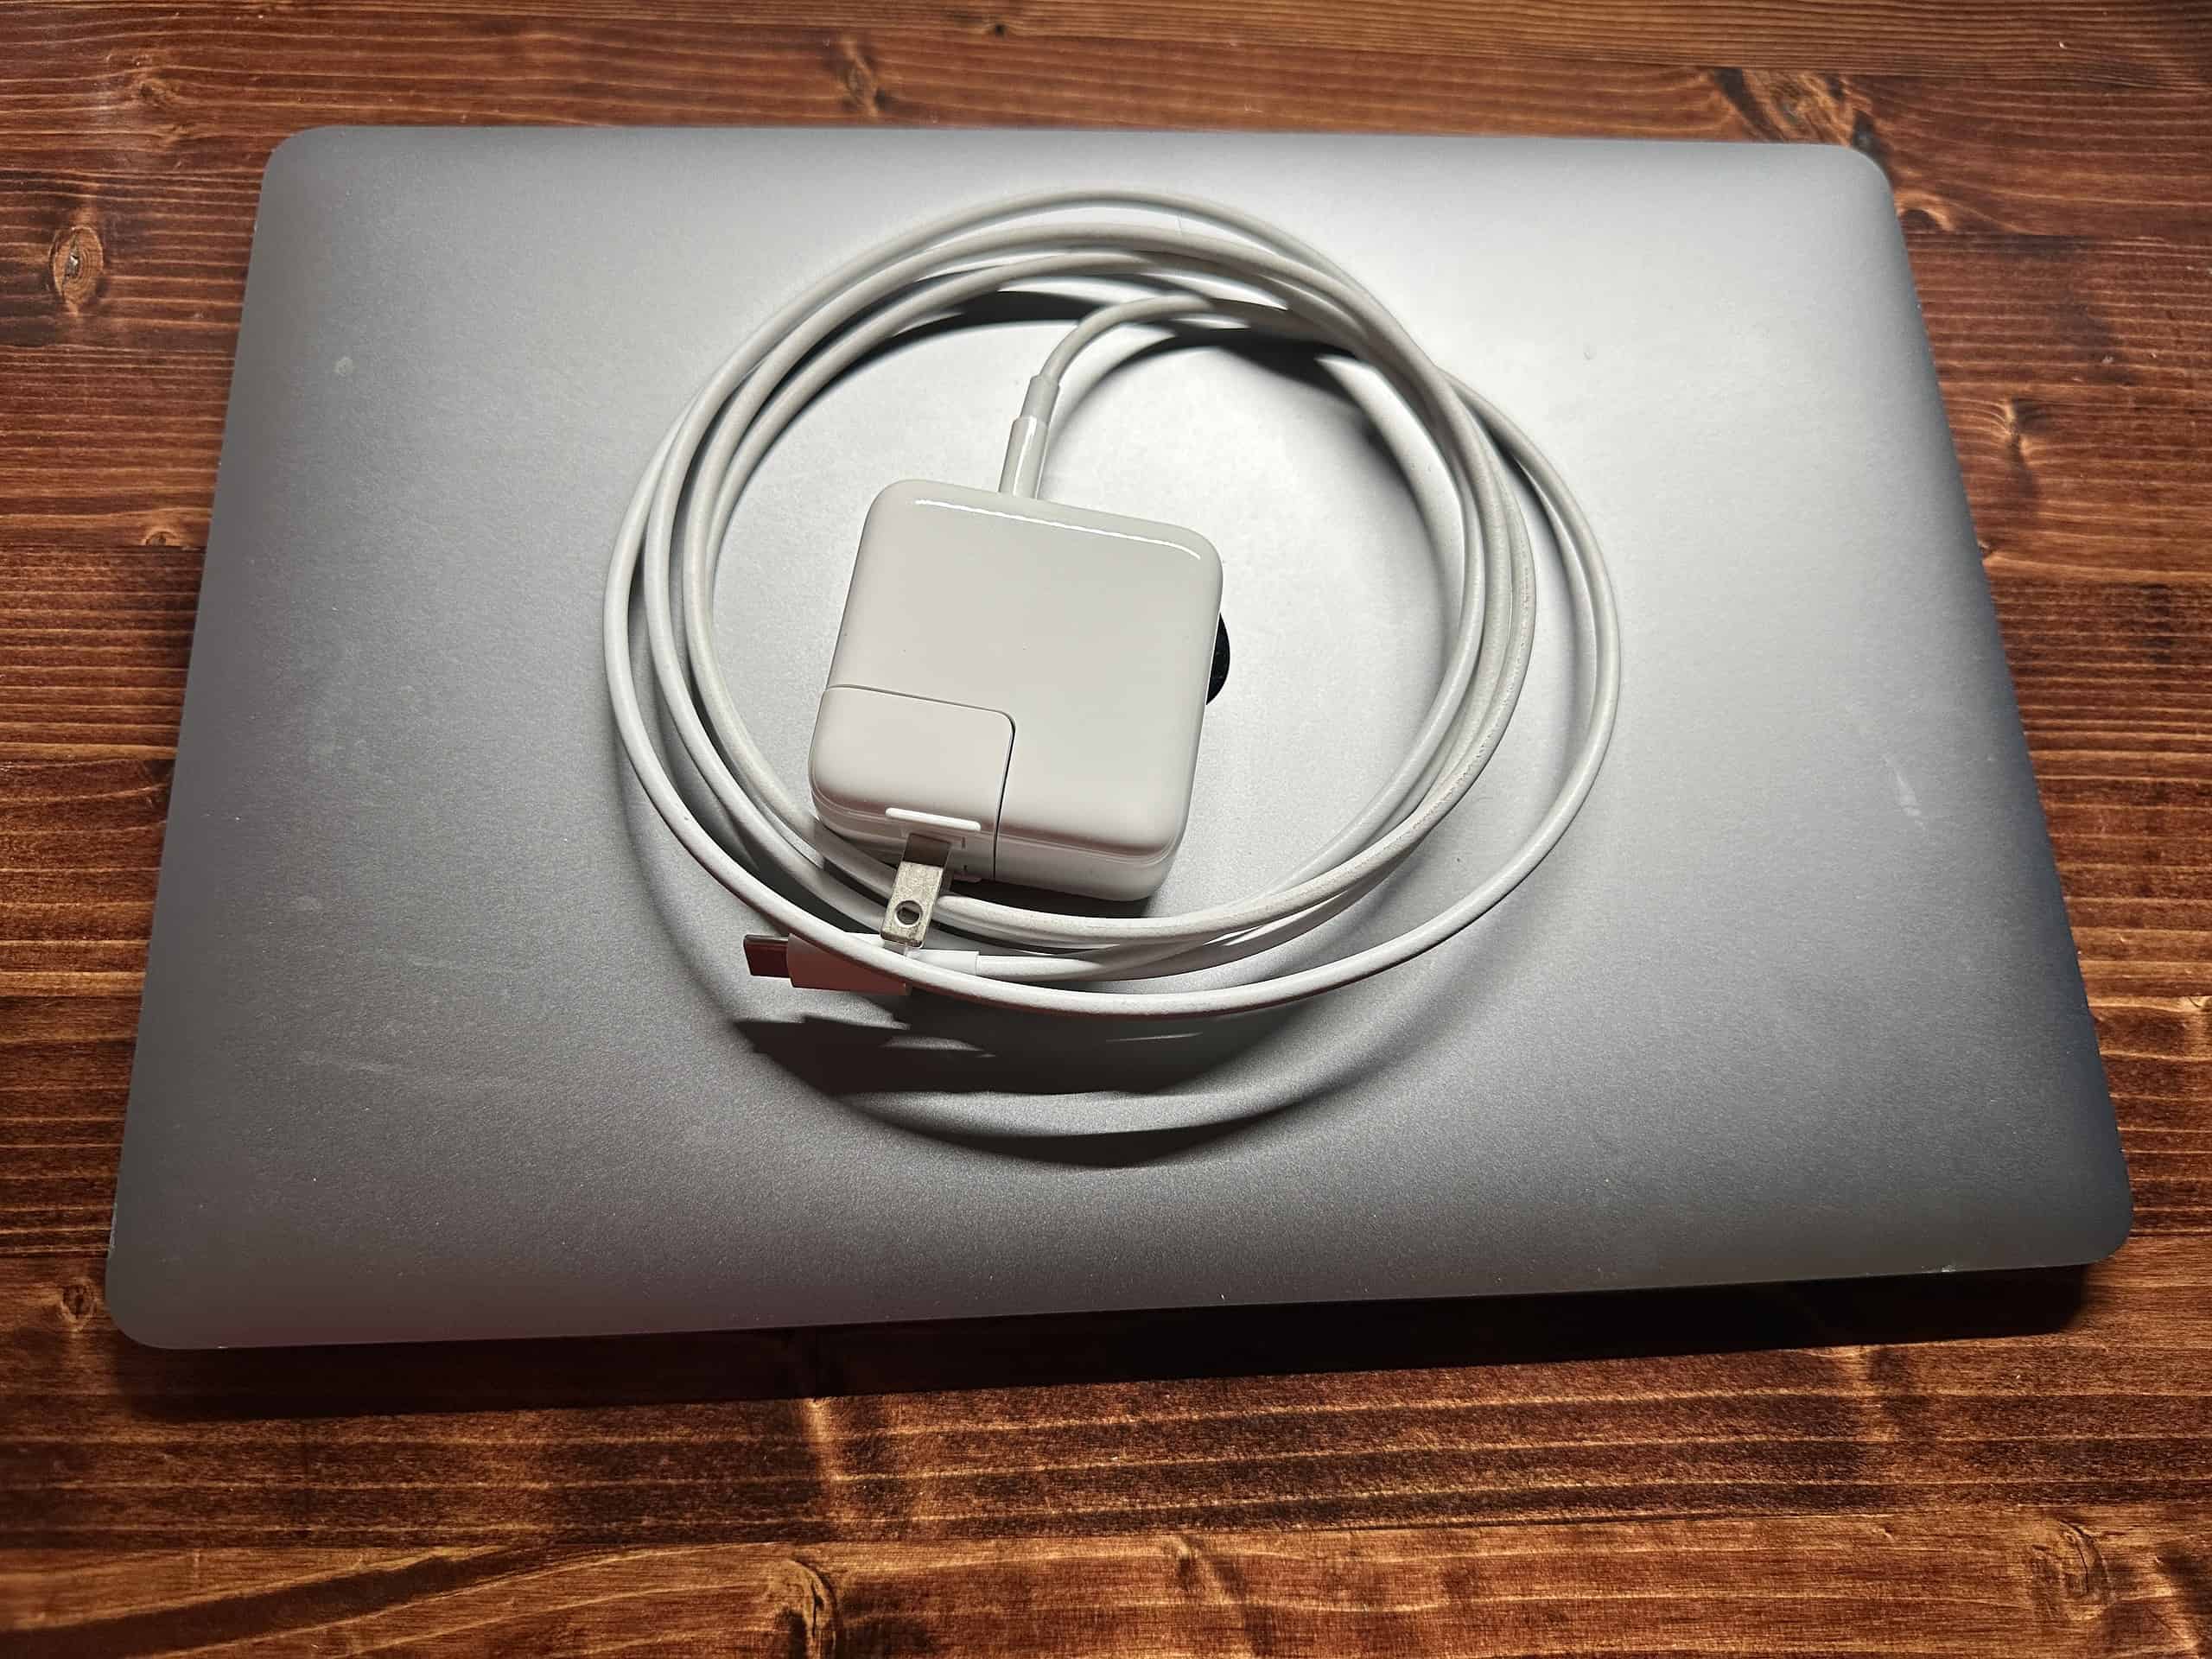 MacBook Air with a USB-C charger and adapter on top